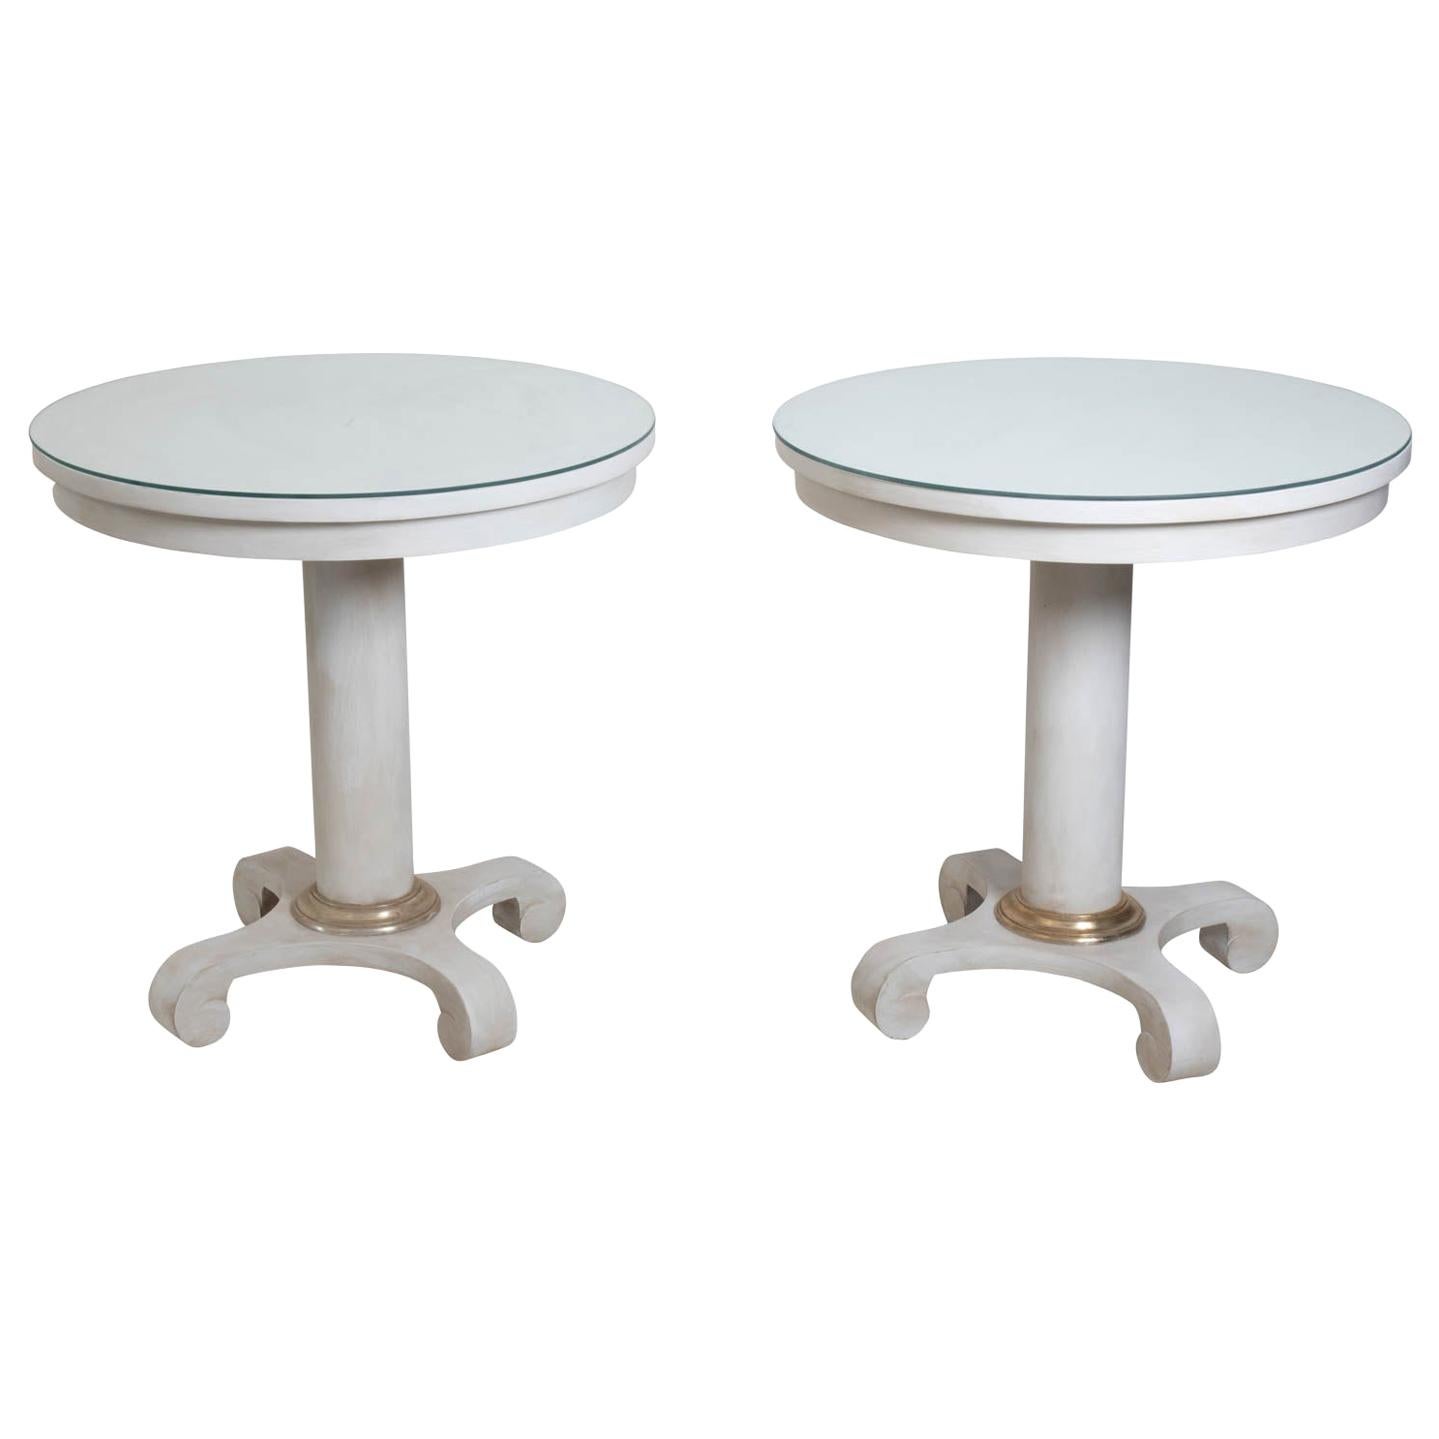 Pair of White Painted Rounded Tables by Mitchell Gold and Bob Williams